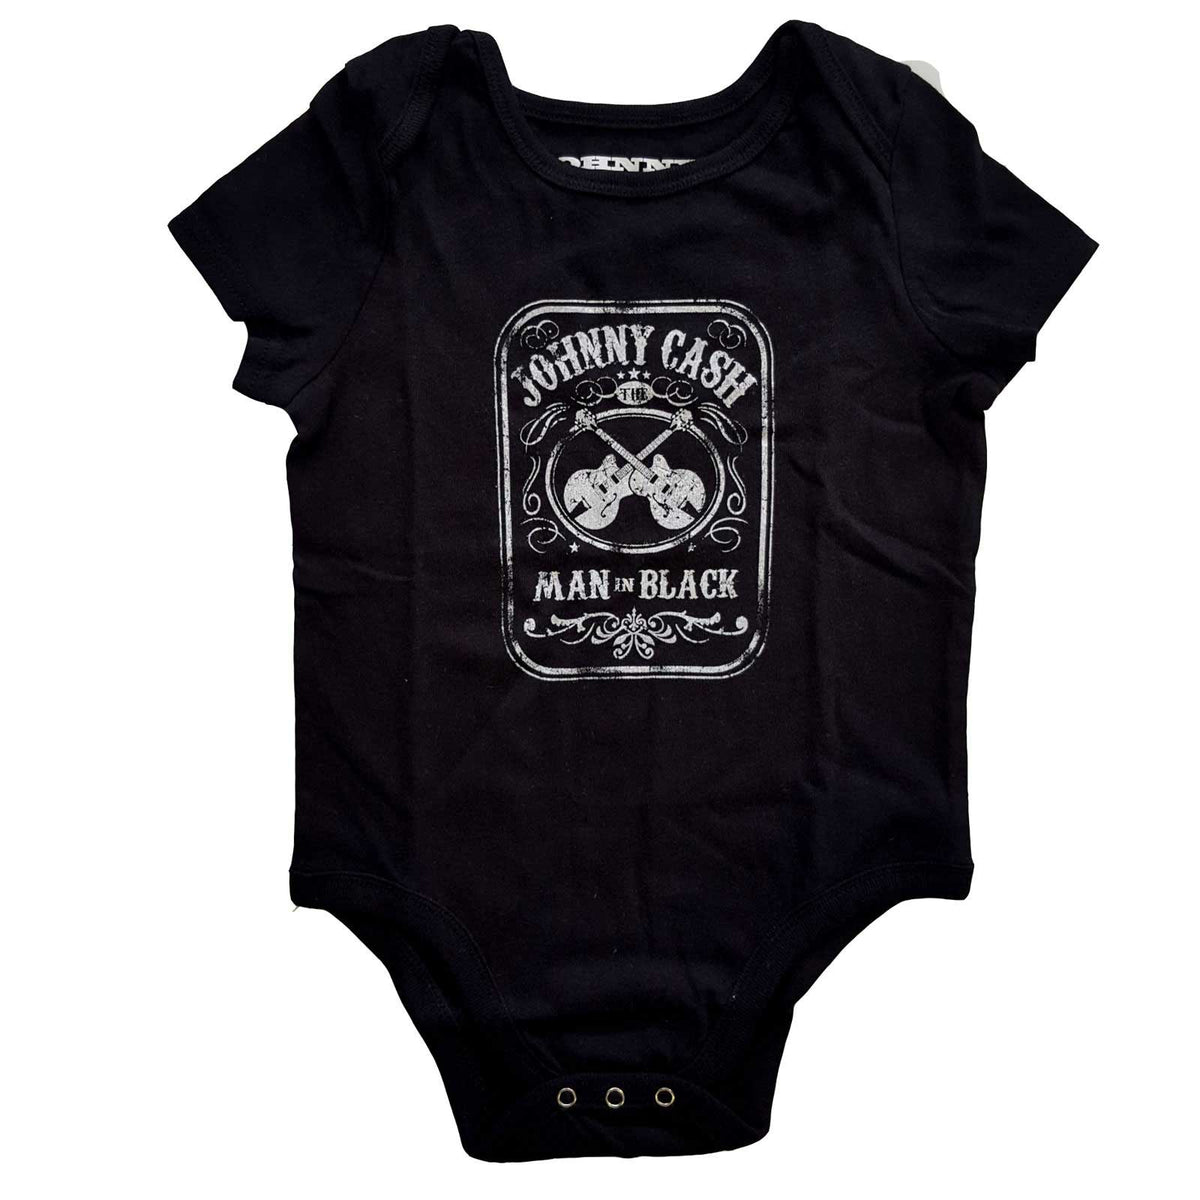 Johnny Cash Kids Baby Grow - Man in Black - Official Licensed Product